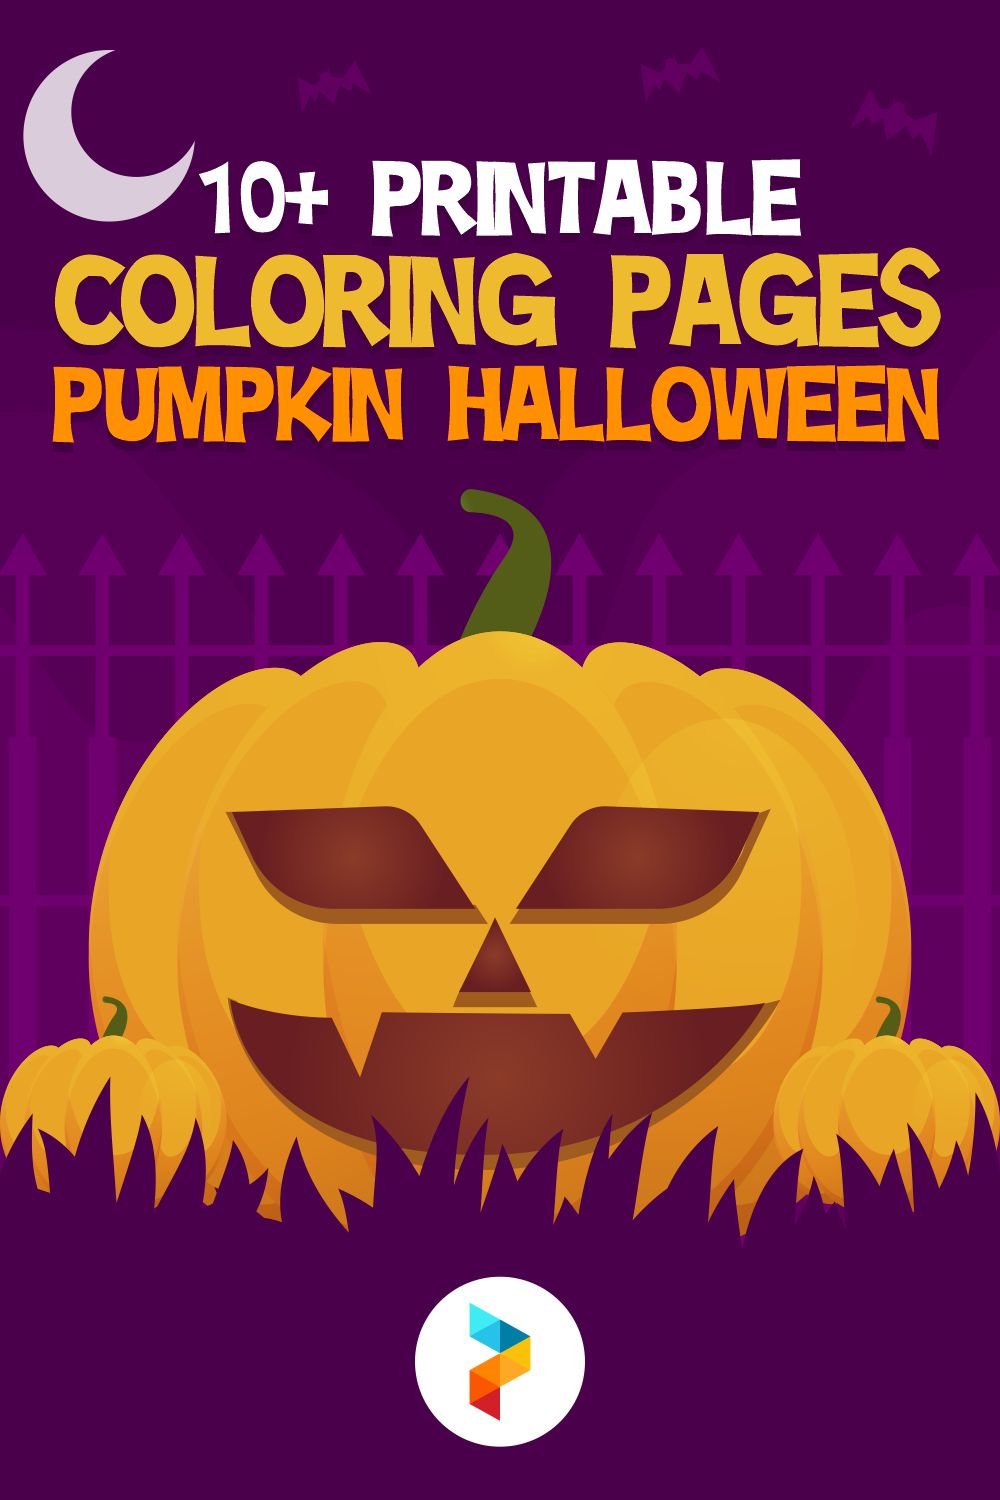 Printable Coloring Pages Pumpkin Halloween